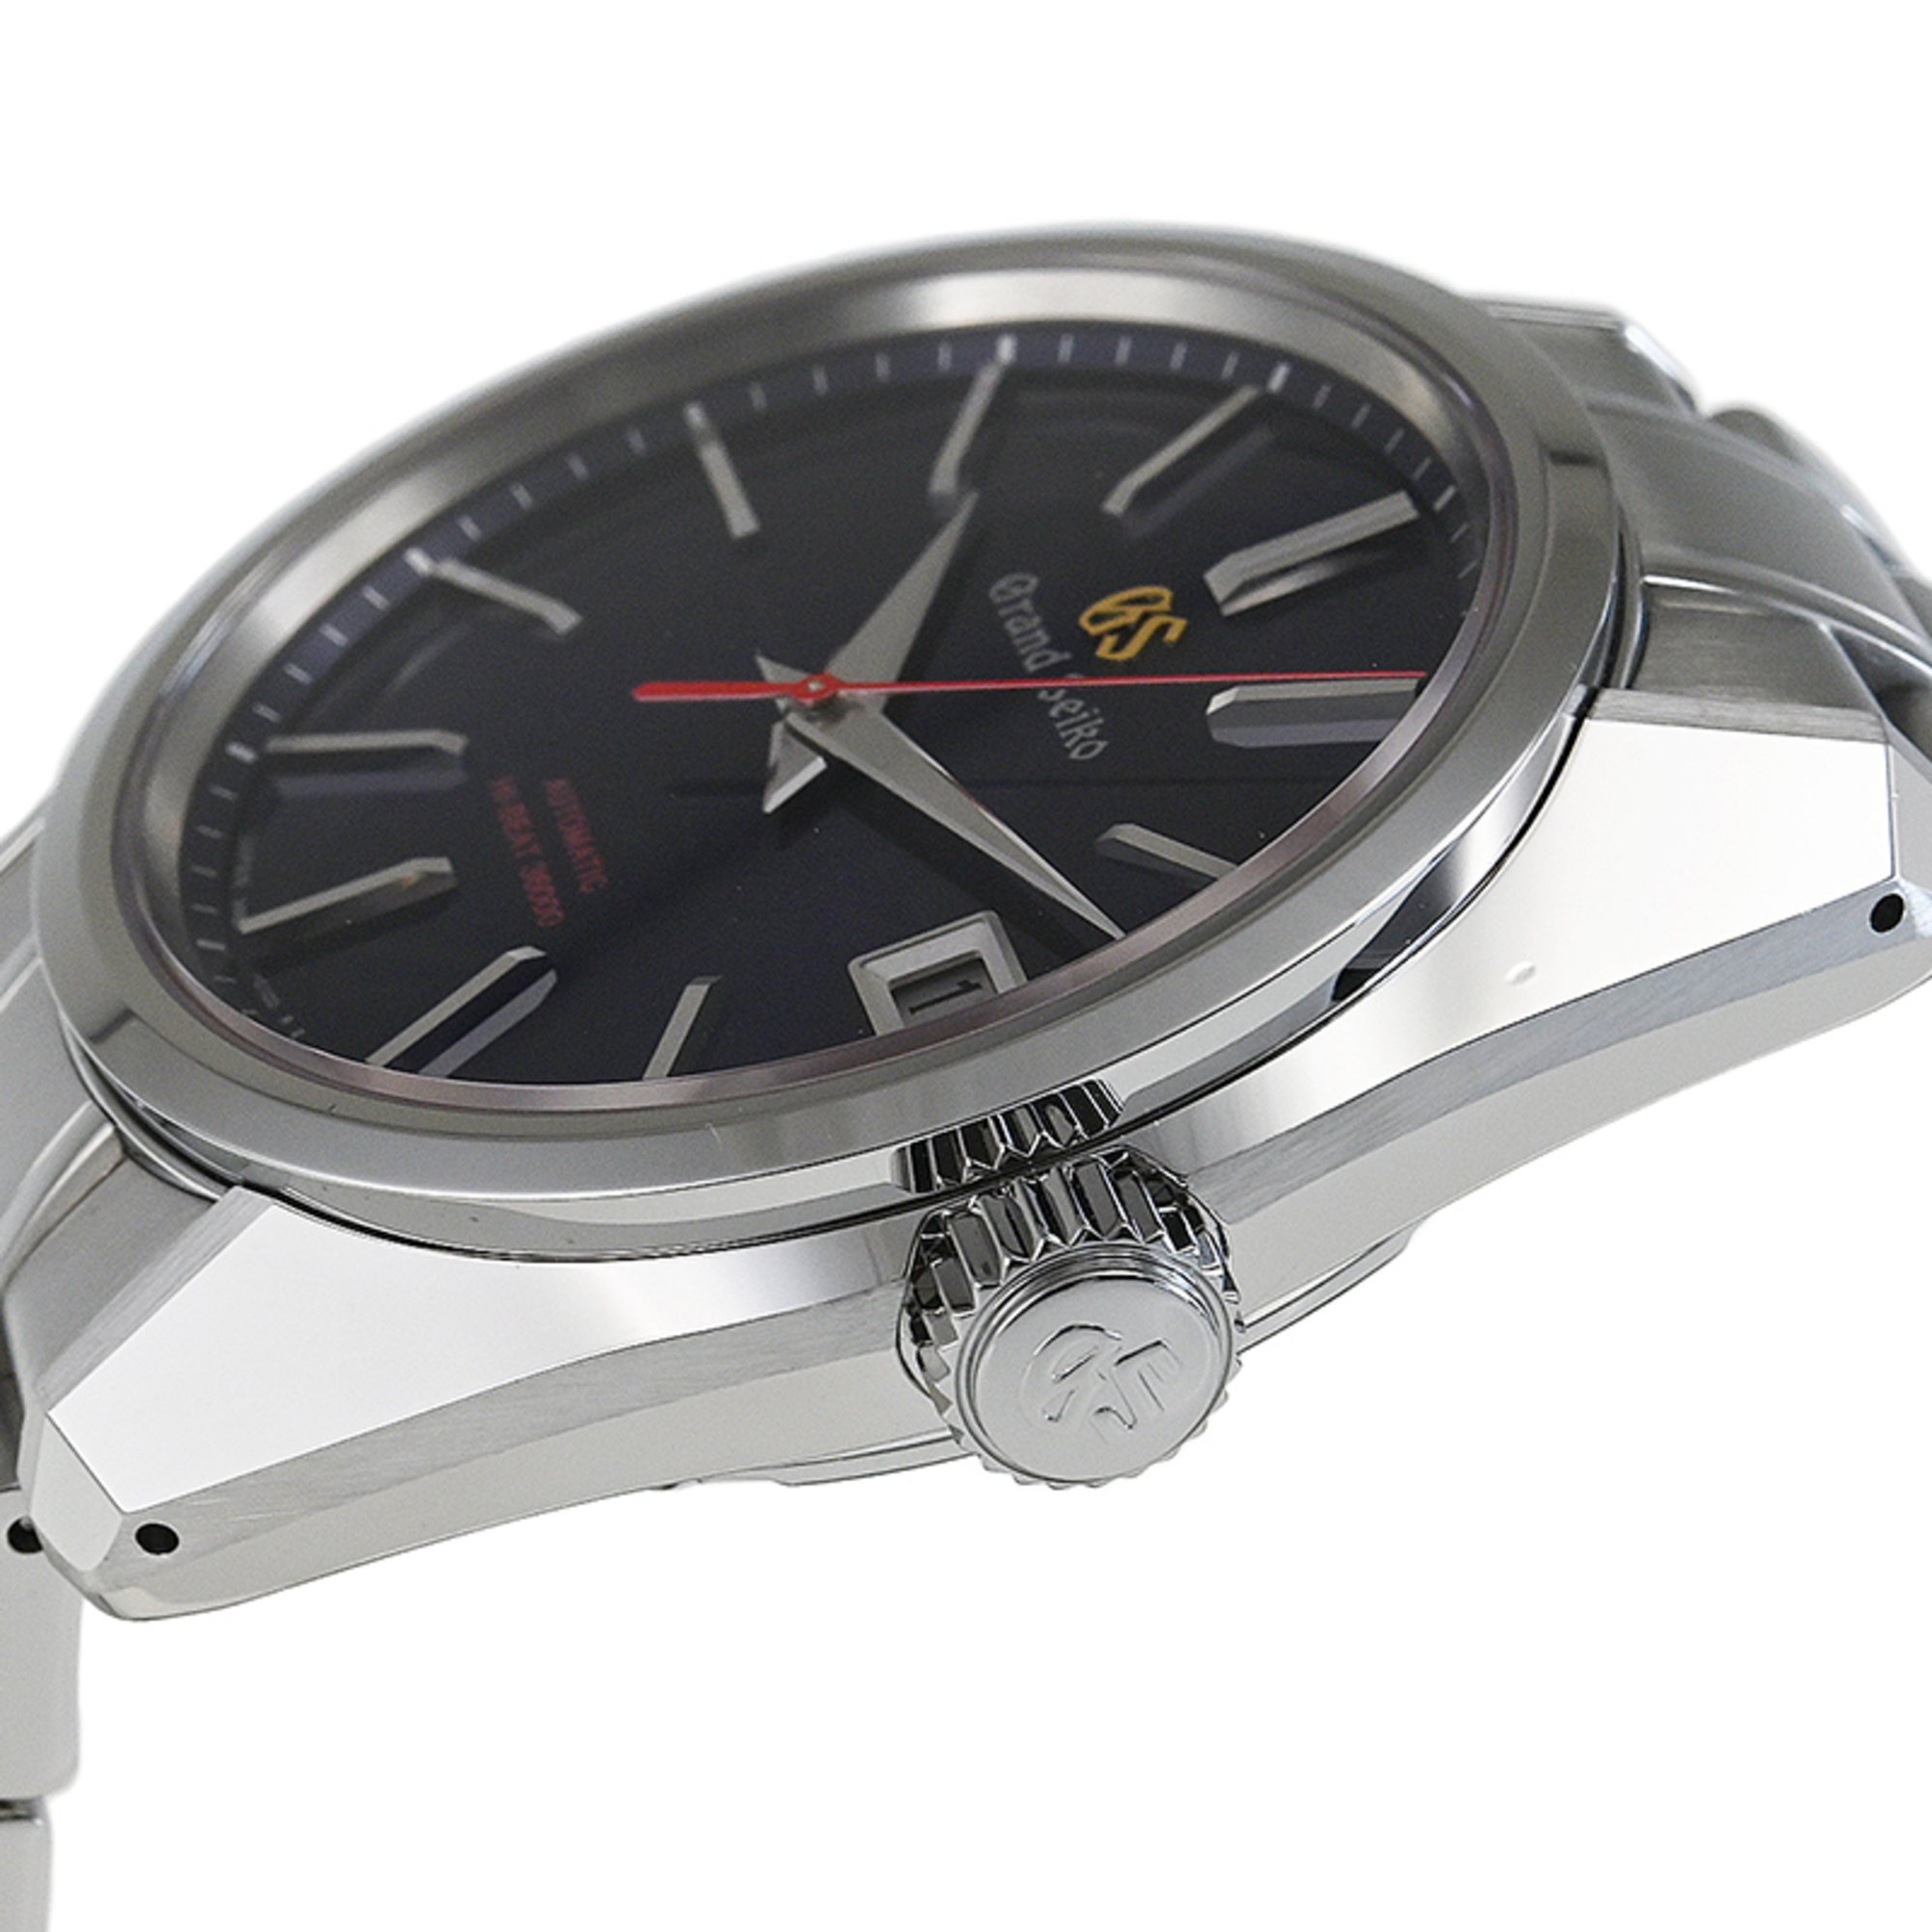 SEIKO Grand Seiko 60th Anniversary Limited Model Heritage Collection Mechanical High Beat 36000 1500 Watch SBGH281